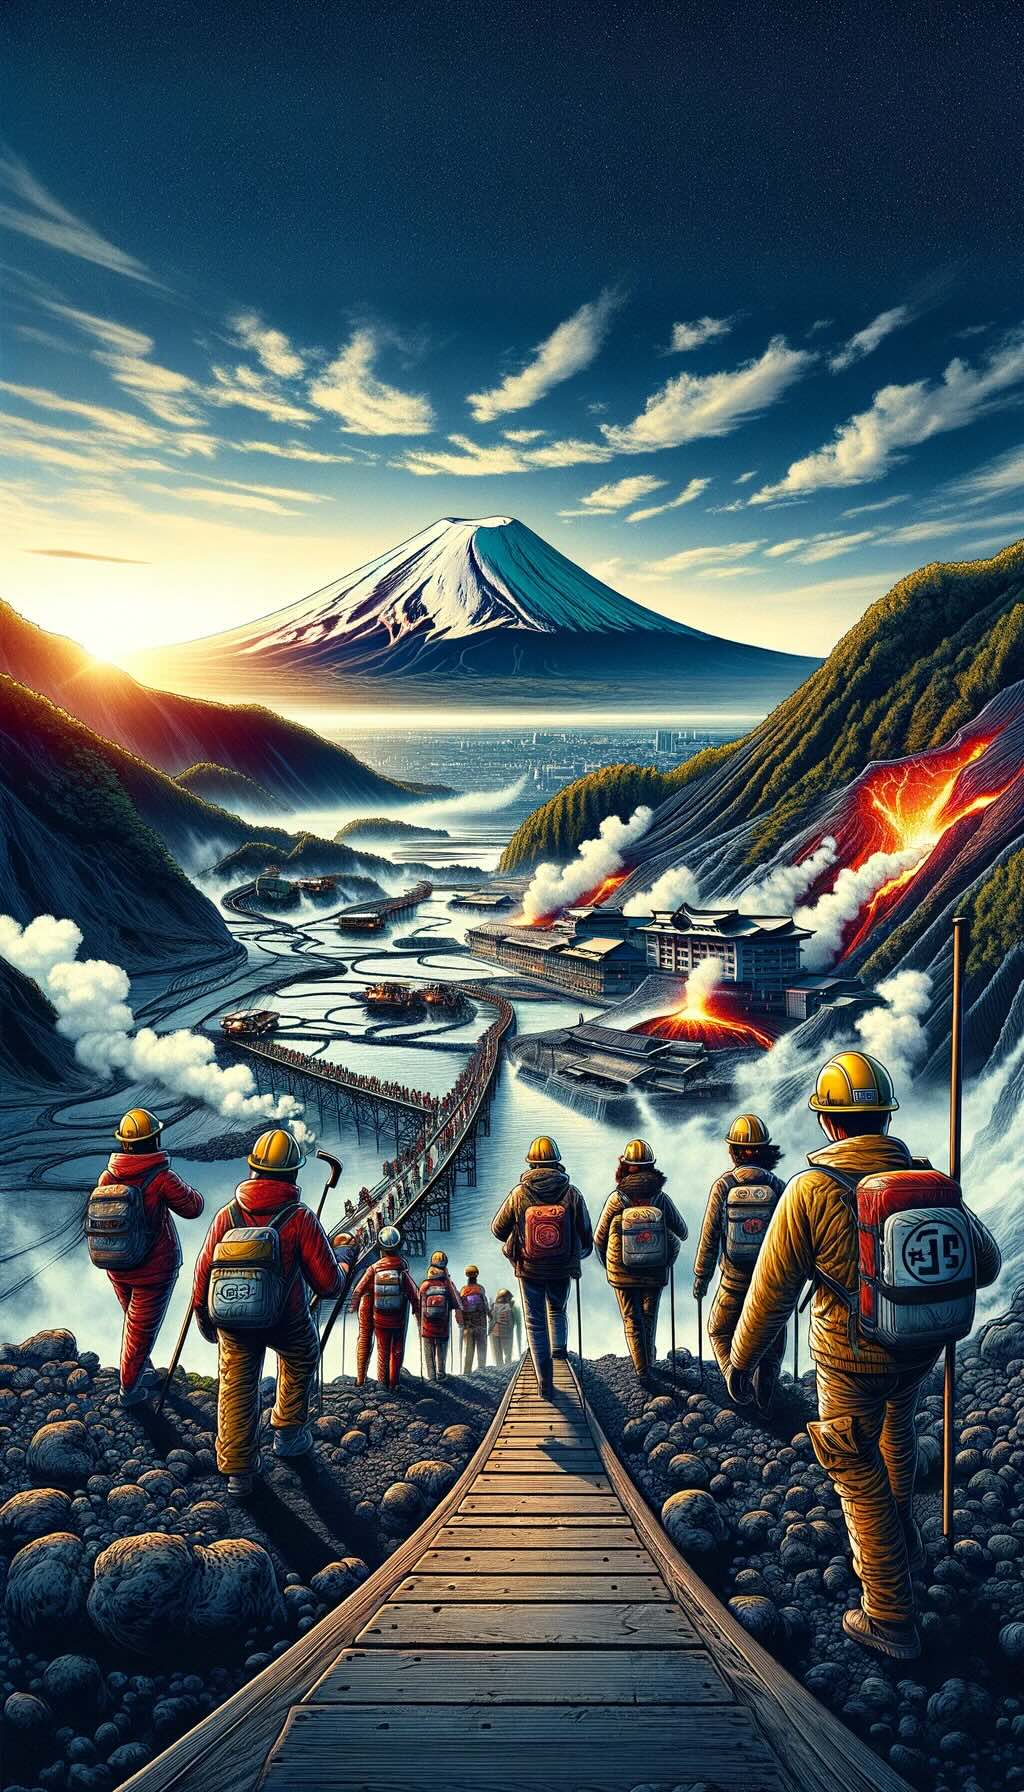 Allure and beauty of Japan's volcanic regions showcases the iconic Mount Fuji, tourists enjoying hot springs, and the safe exploration of volcanic areas, highlighting the majesty and cultural significance of these natural wonders along with the theme of responsible and safe tourism.